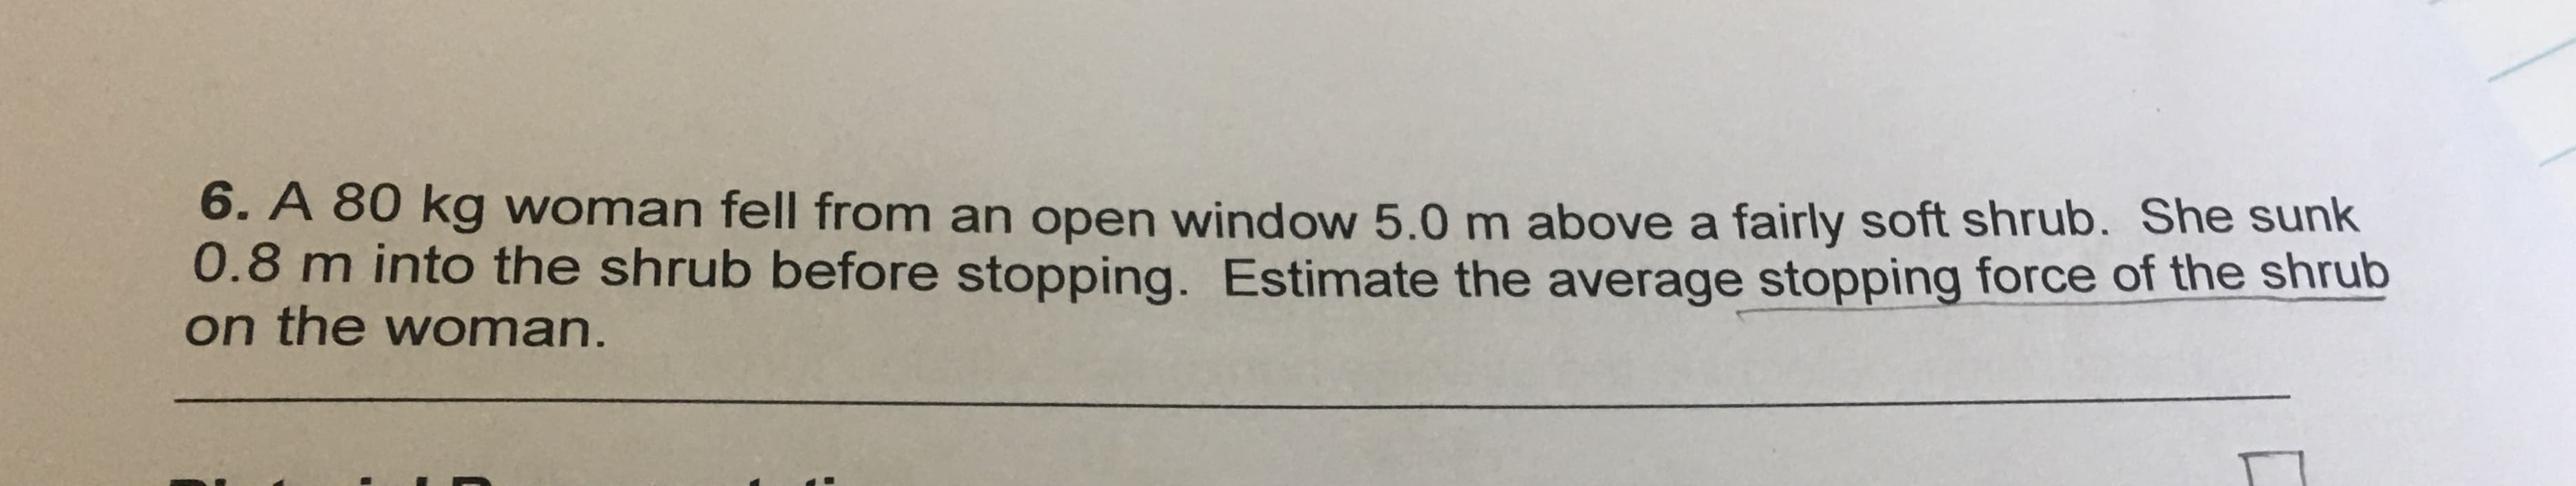 6. A 80 kg woman fell from an open window 5.0 m above a fairly soft shrub. She sunk
0.8 m into the shrub before stopping. Estimate the average stopping force of the shrub
on the woman.
